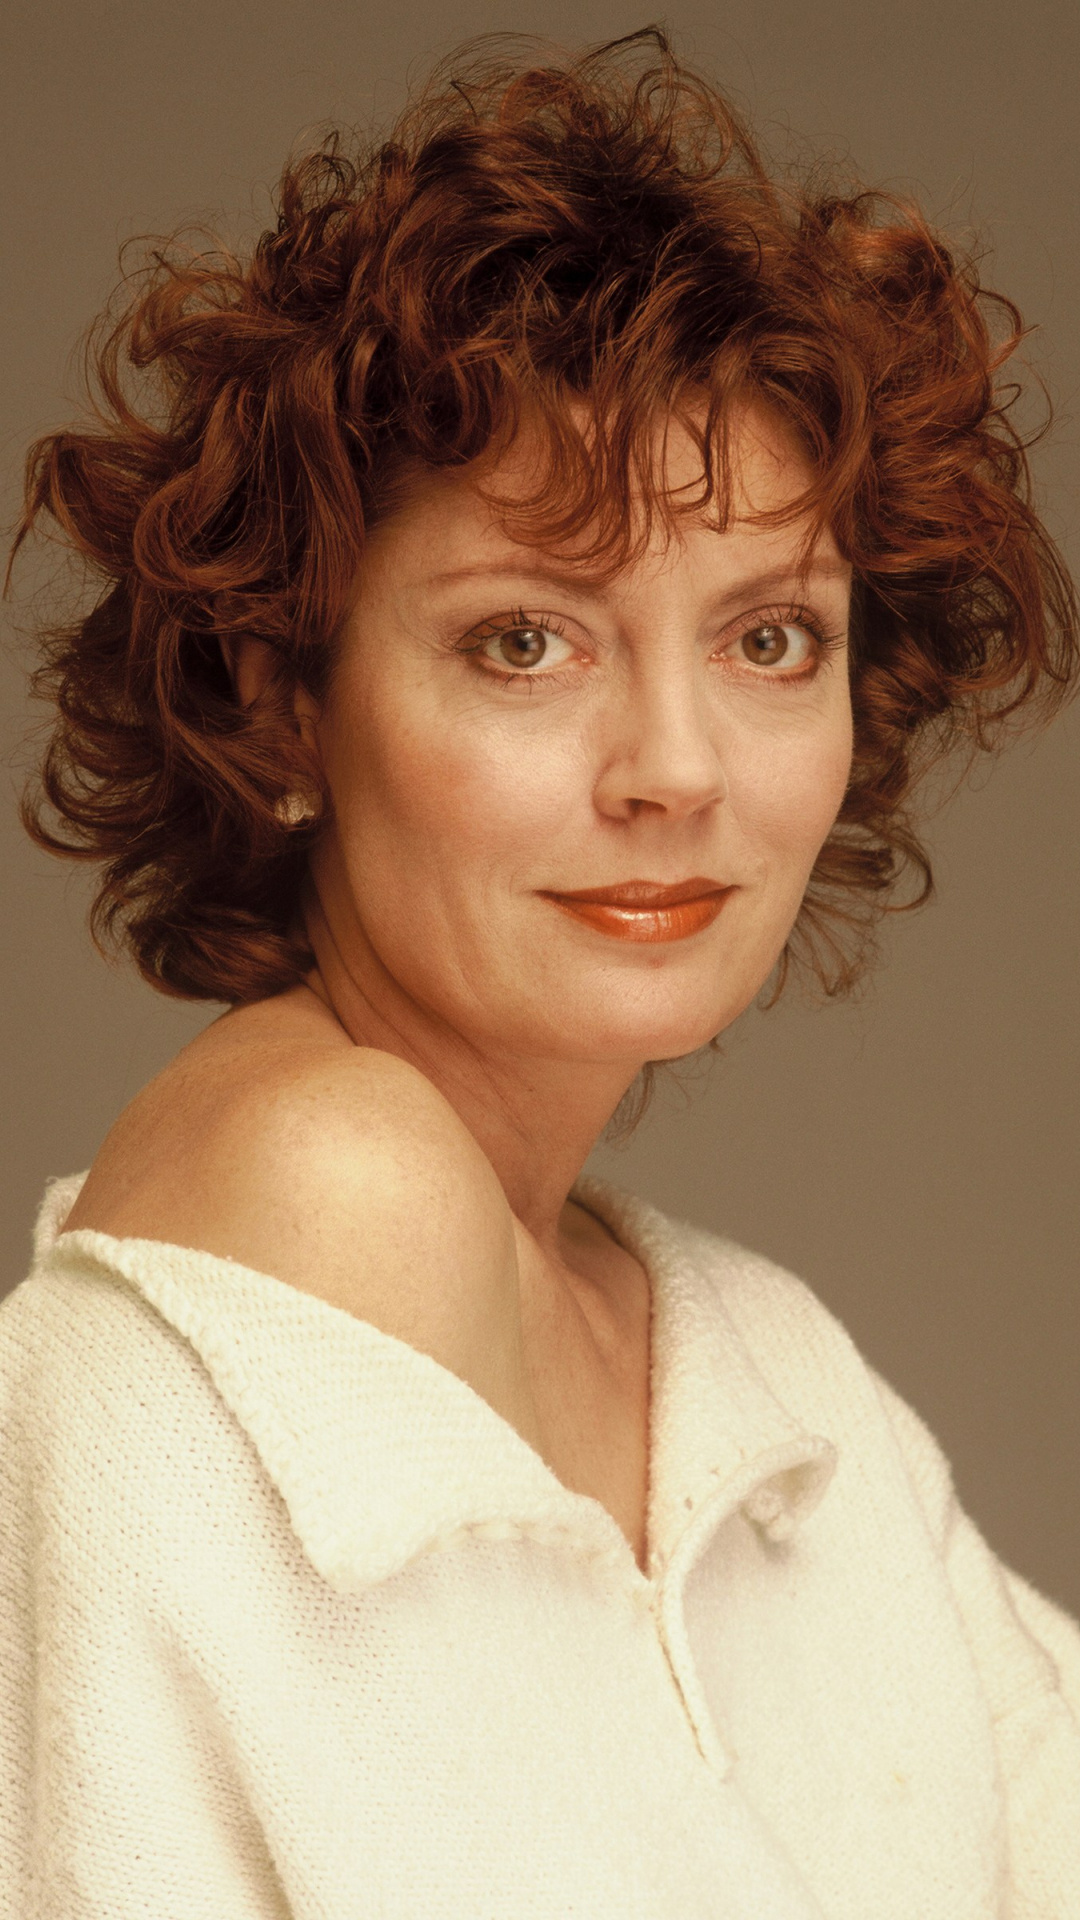 Susan Sarandon, Movies, Pictures of celebrities, 1080x1920 Full HD Handy